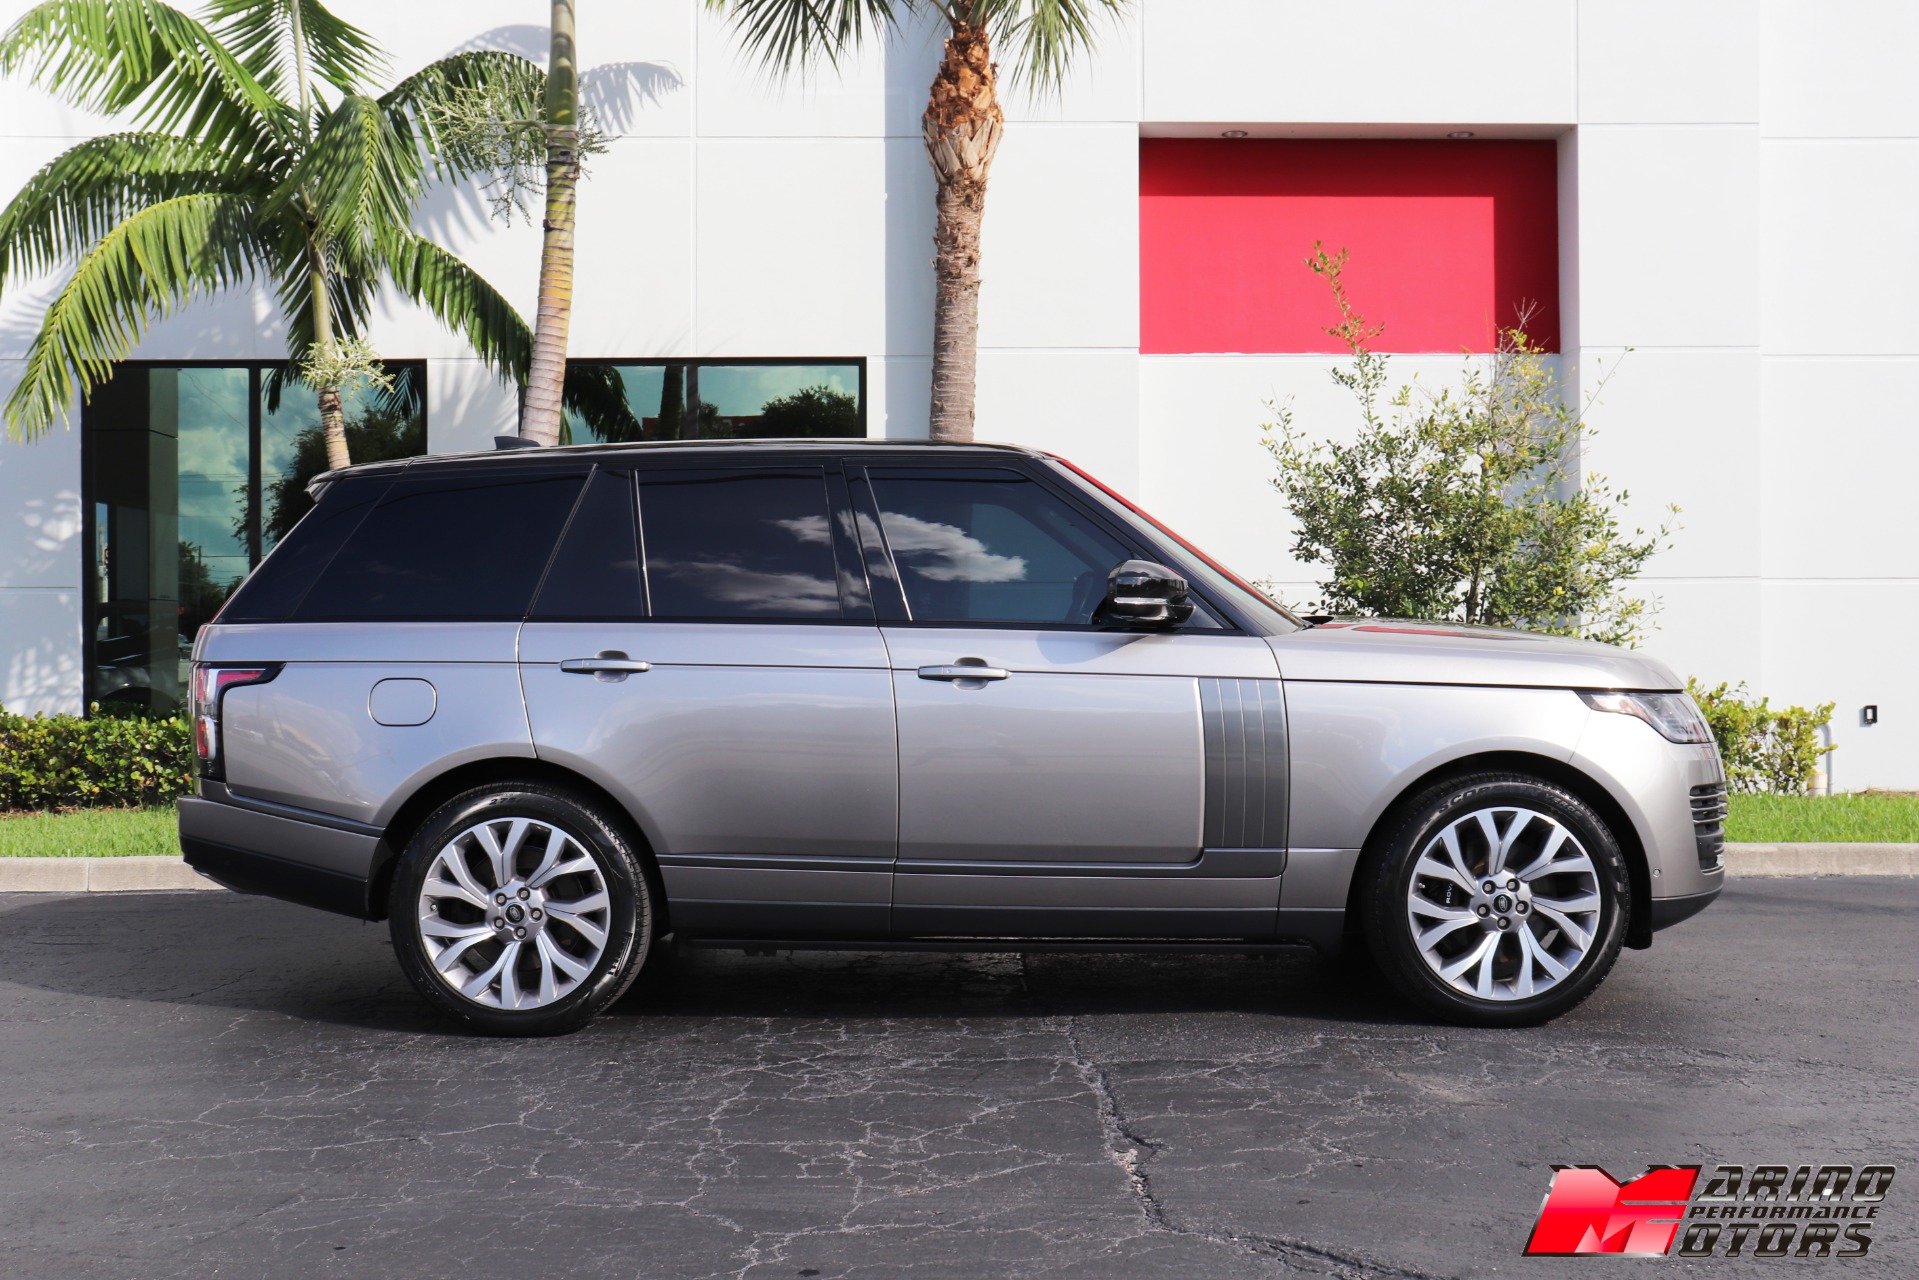 Used-2020-Land-Rover-Range-Rover-PHEV-Autobiography